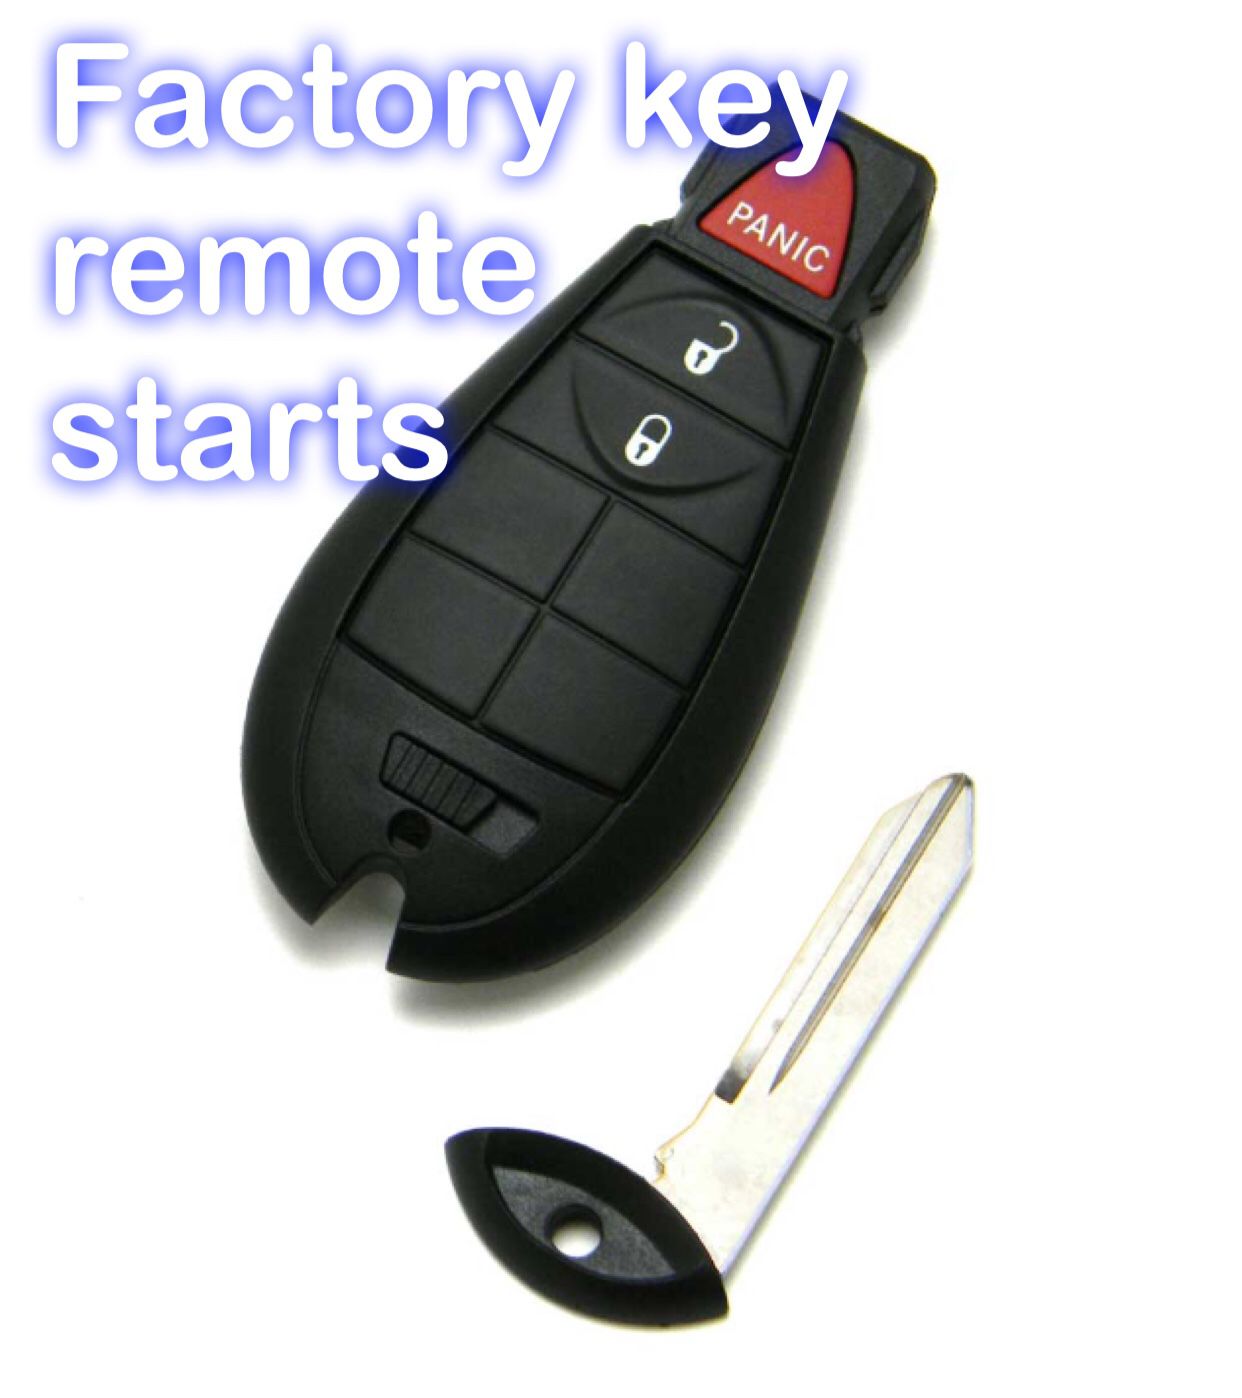 Professional mobile remote start service I GO TO YOU!!